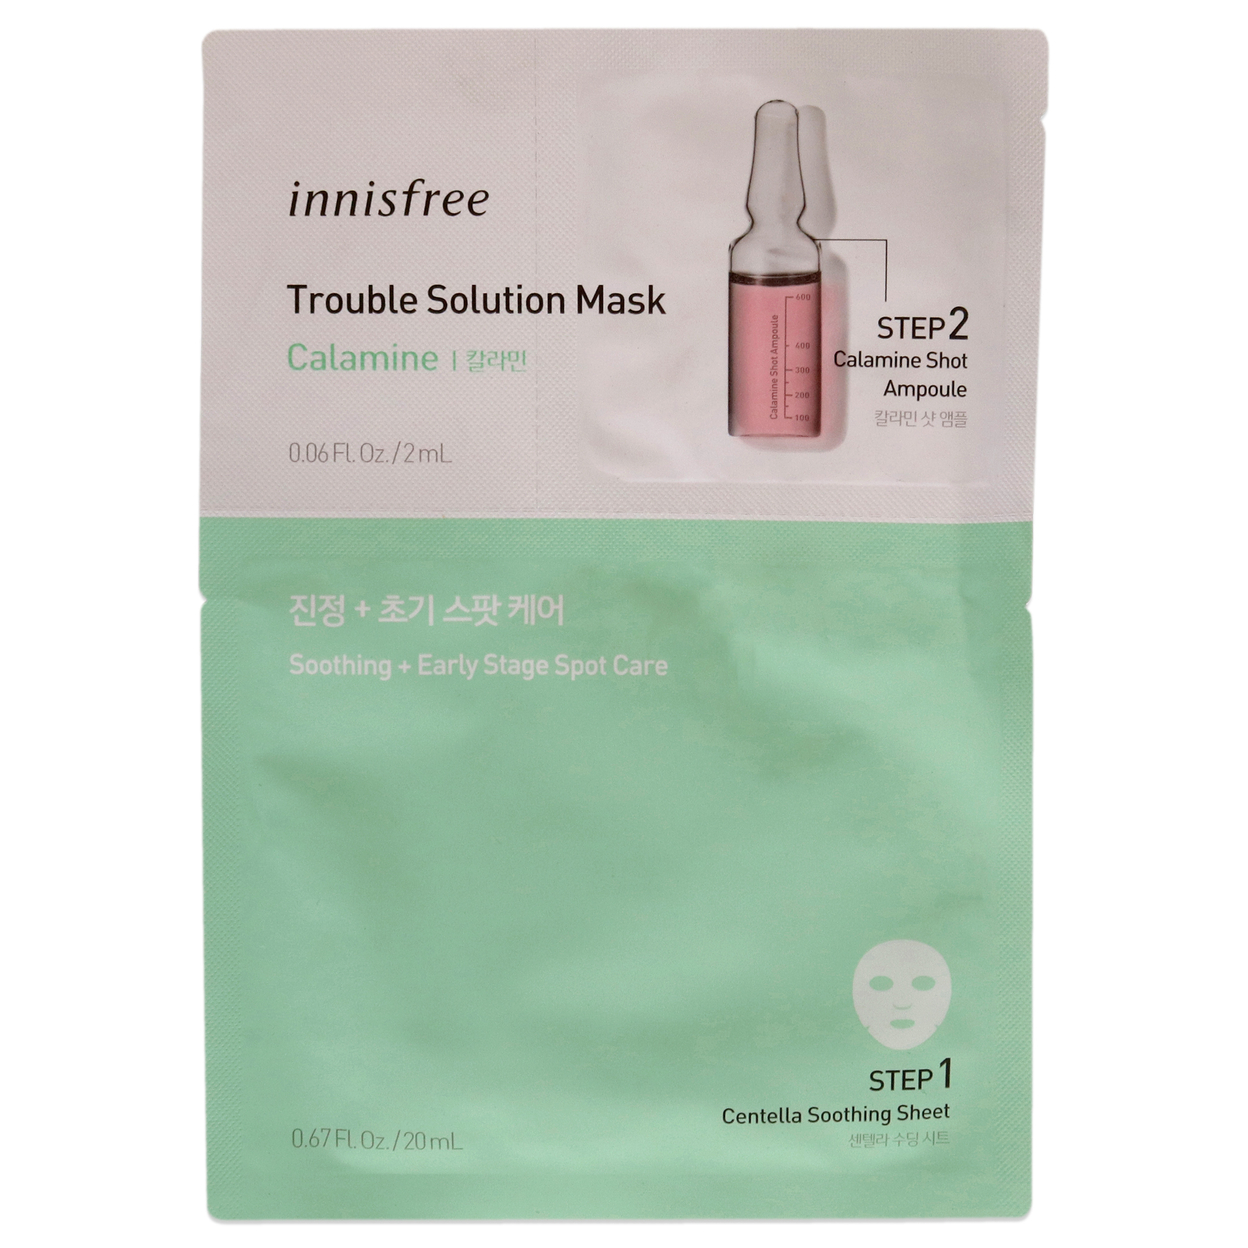 Innisfree Trouble Solution Mask - Calamine 0.67 Step 1 Centella Soothing Sheet, 0.06oz Step 2 Calmine Shot Ampoule 1 Pc Kit